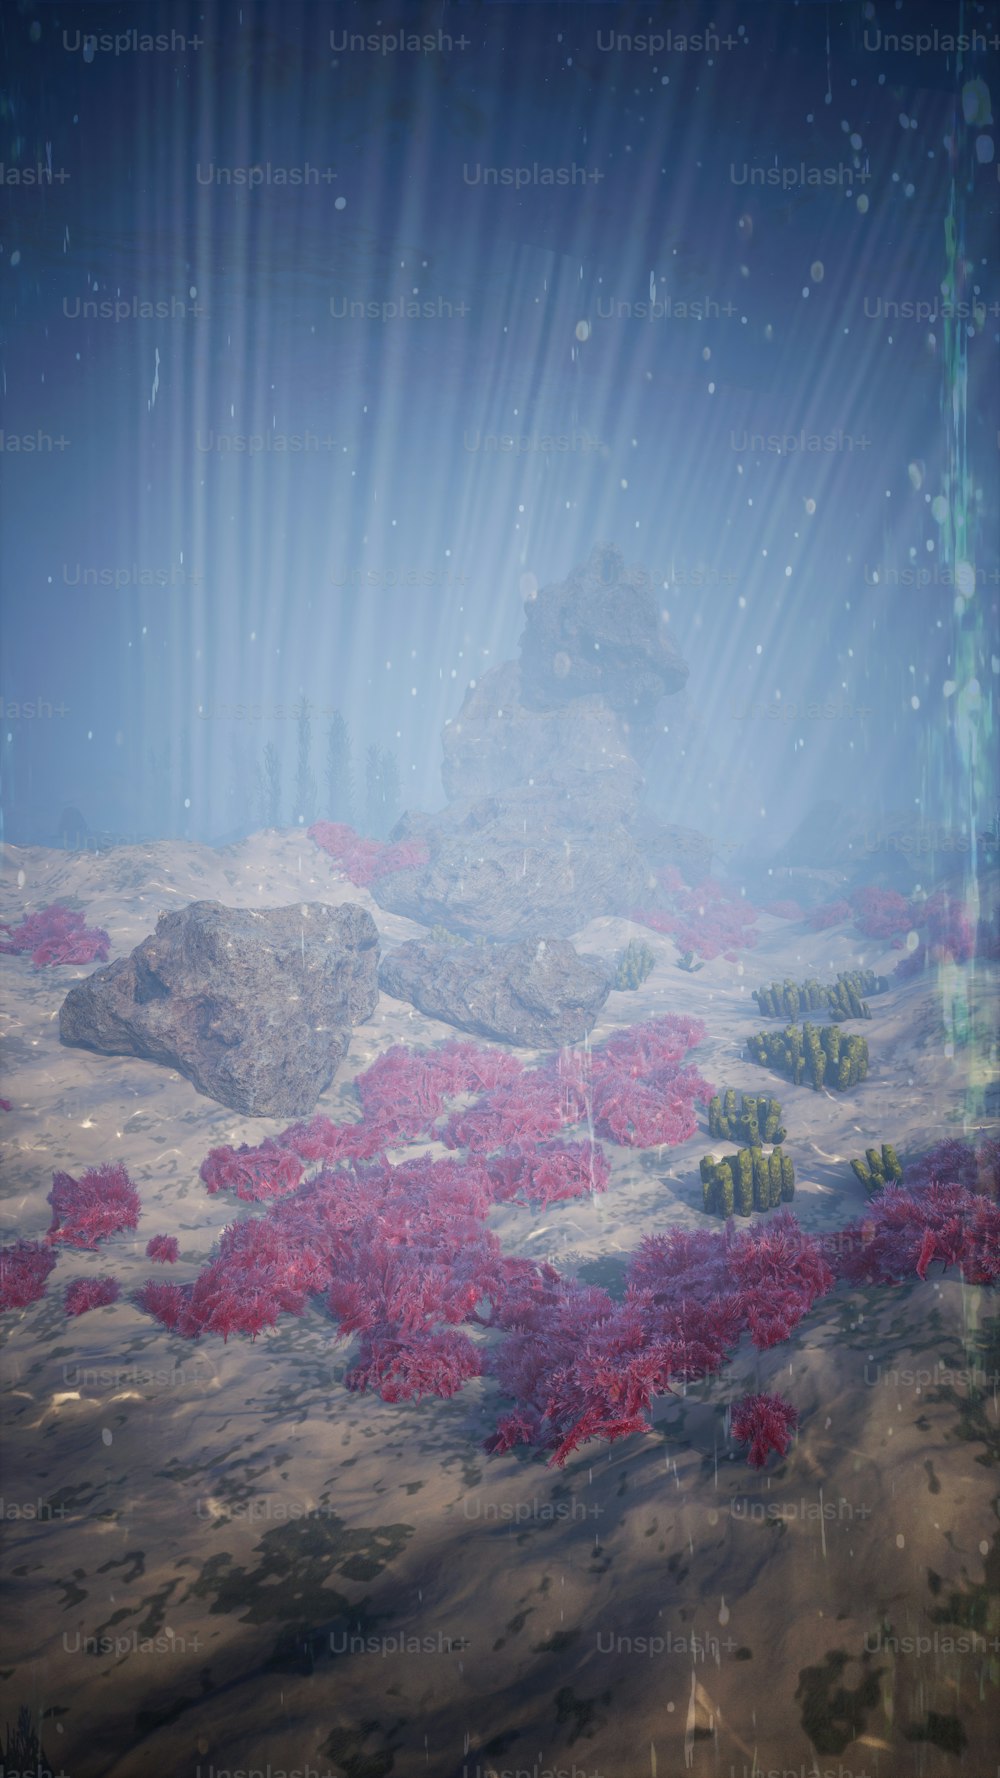 an underwater scene with red plants and rocks